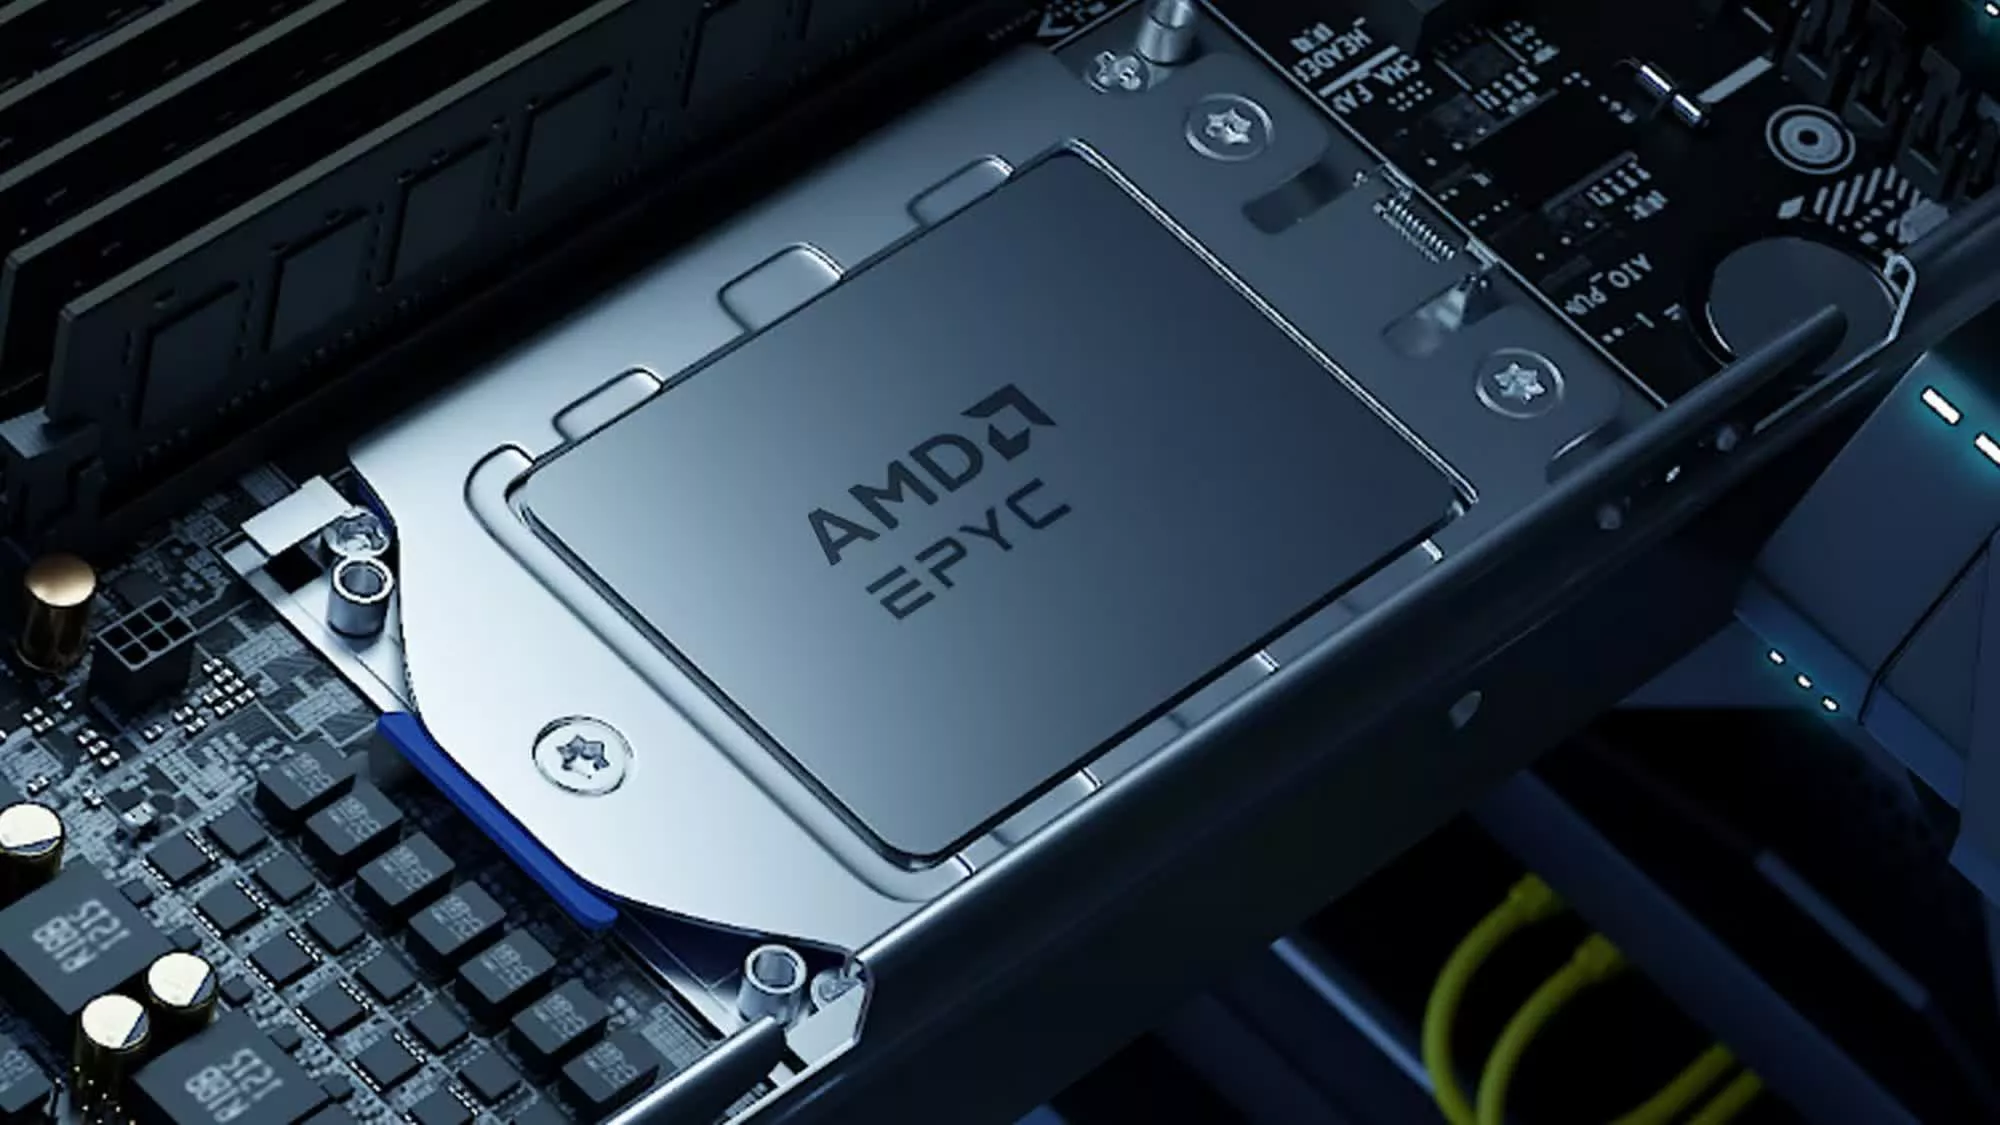 amd-claims-epyc-genoa-is-twice-as-fast-as-nvidia’s-grace-superchip,-team-green-counters-with-own-benchmarks-[techspot]